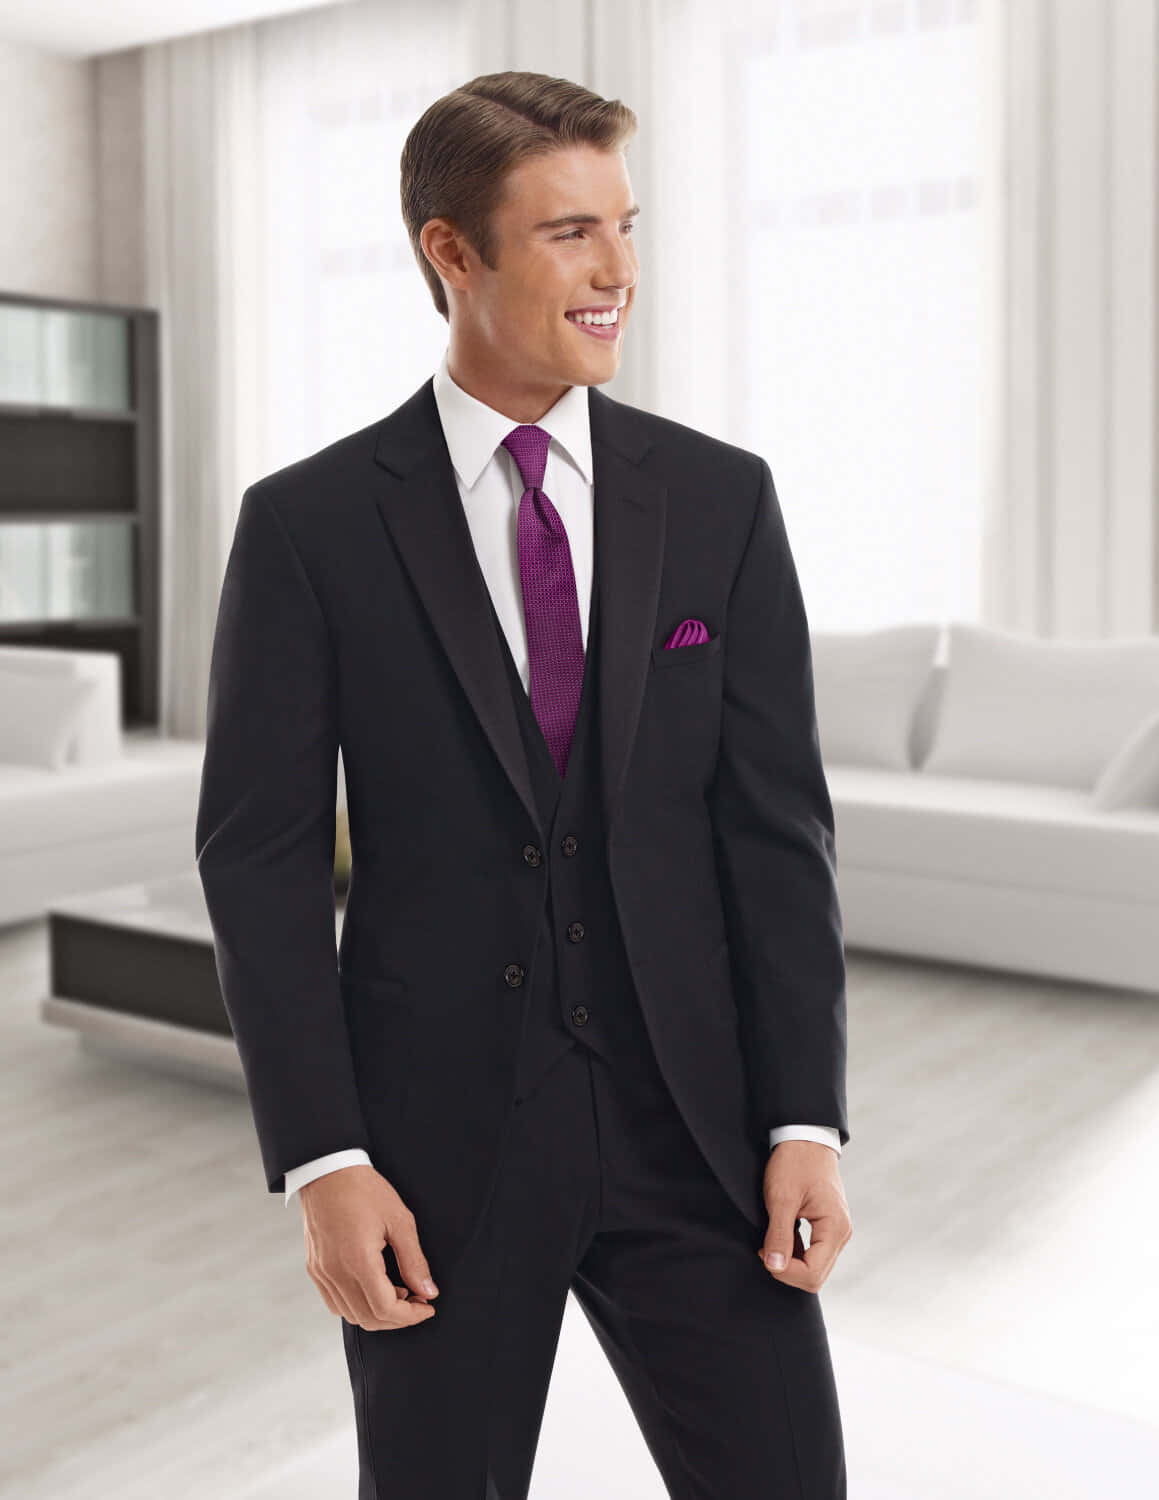 Spruce Up Your Look with a Dapper Purple Tie Wallpaper